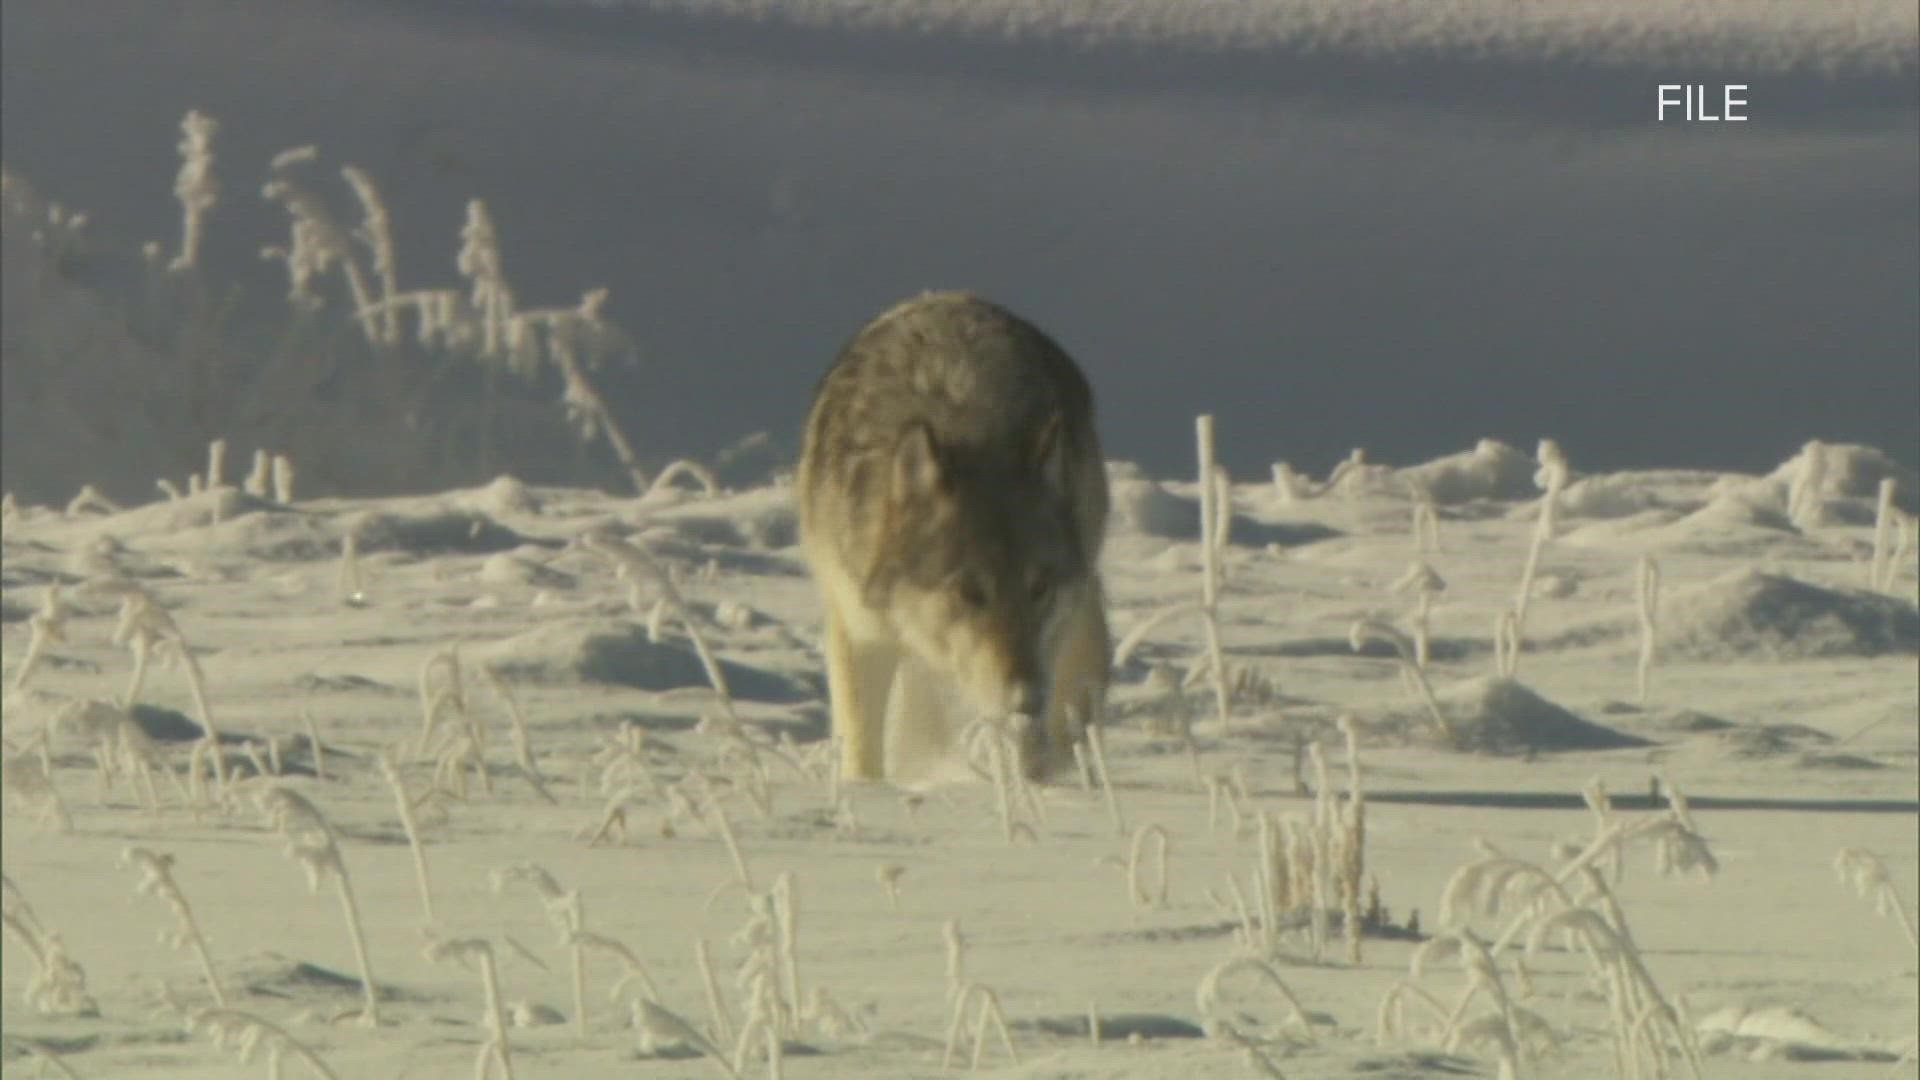 The draft plan, which could change before final approval, calls for the release of 30 to 50 wolves on the Western Slope over 3 to 5 years.